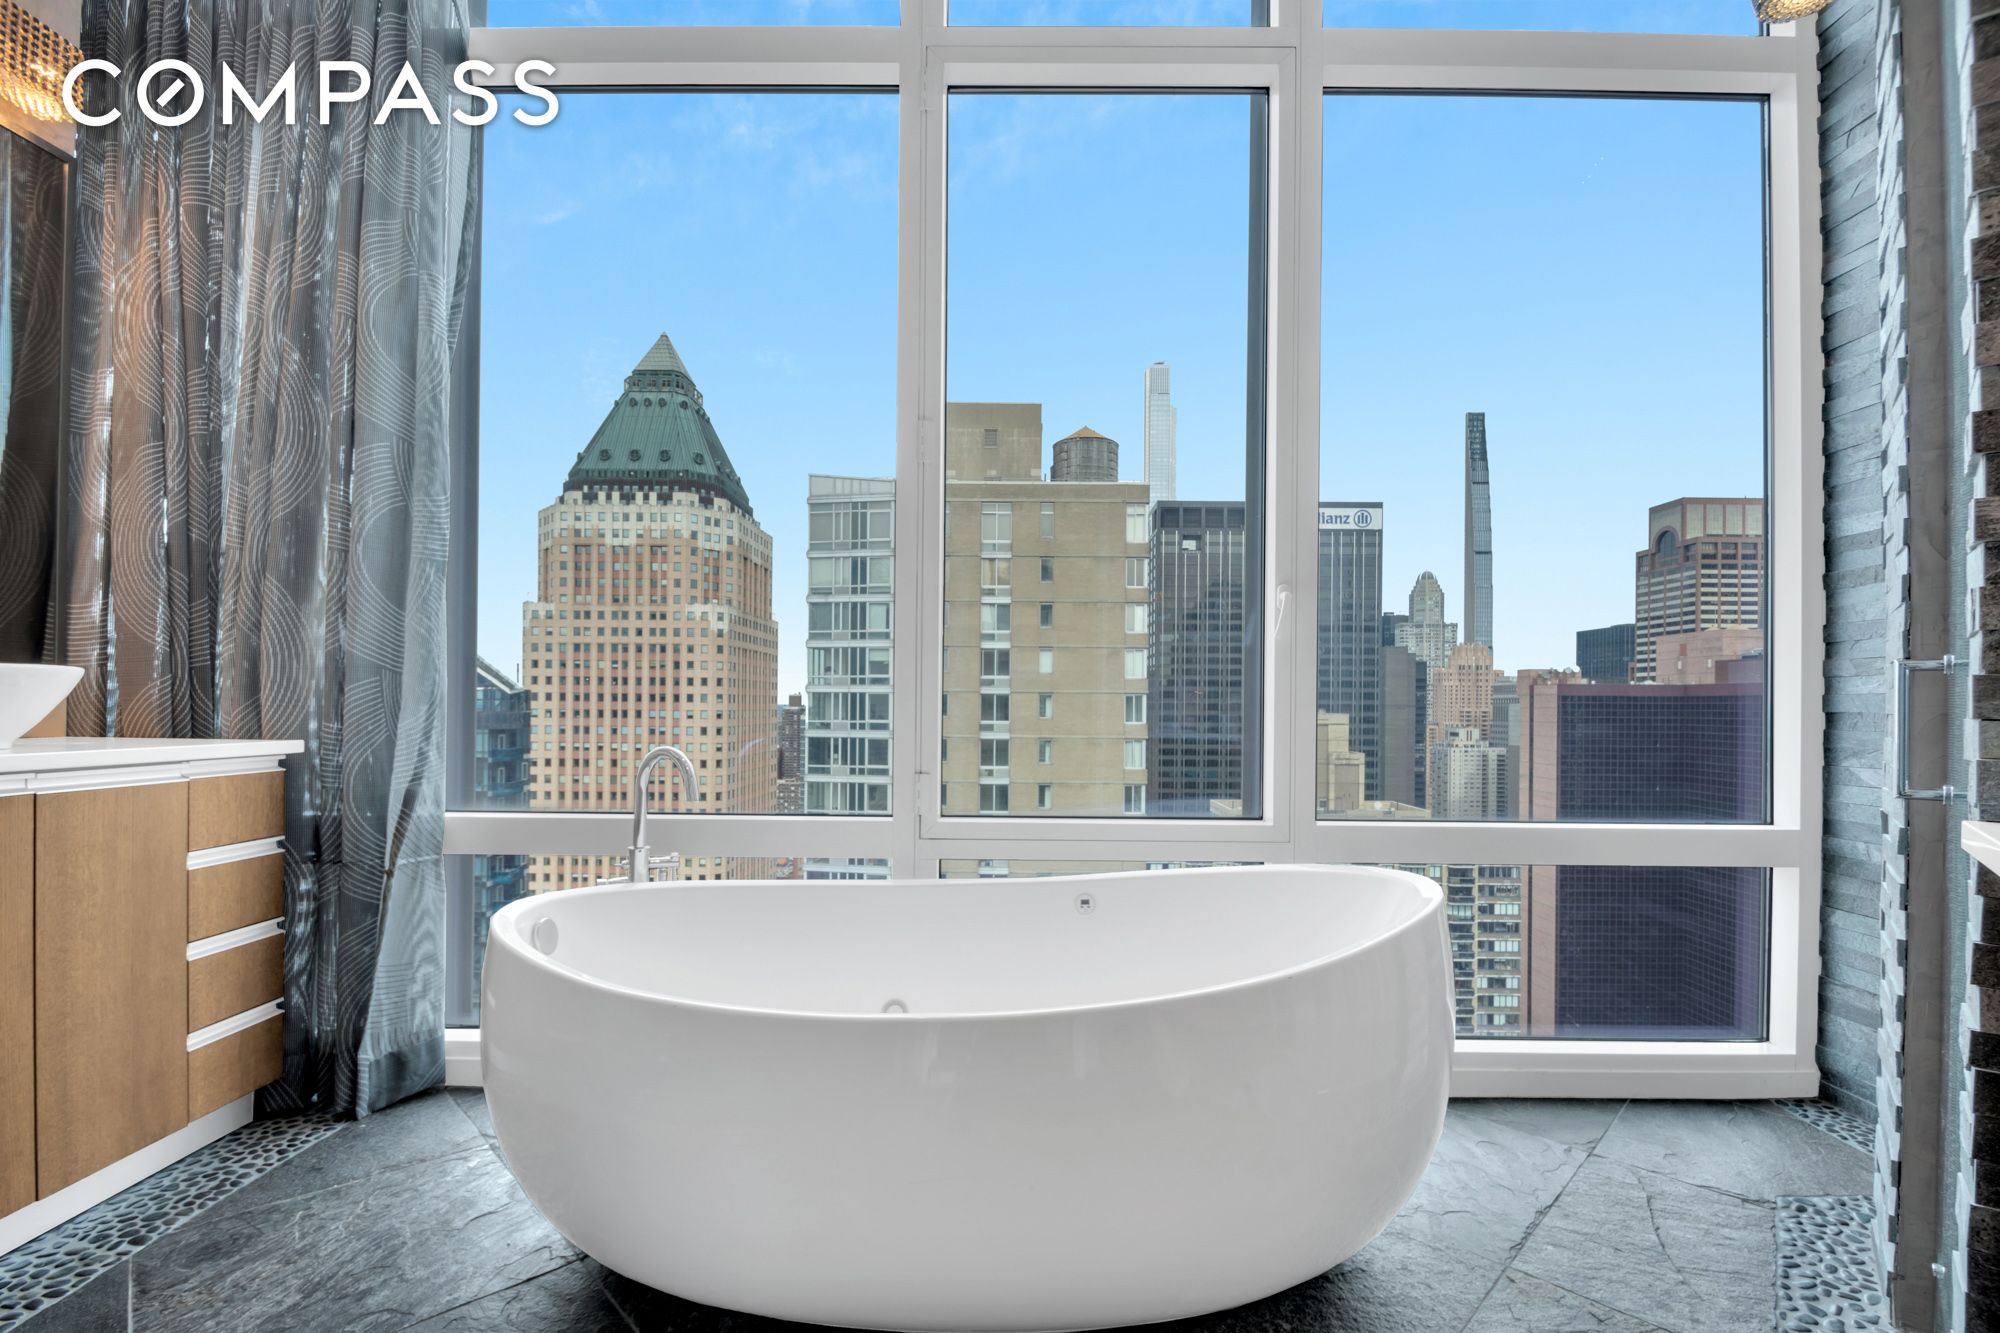 247 West 46th Street Ph2, Theater District, Midtown West, NYC - 5 Bedrooms  
4.5 Bathrooms  
9 Rooms - 